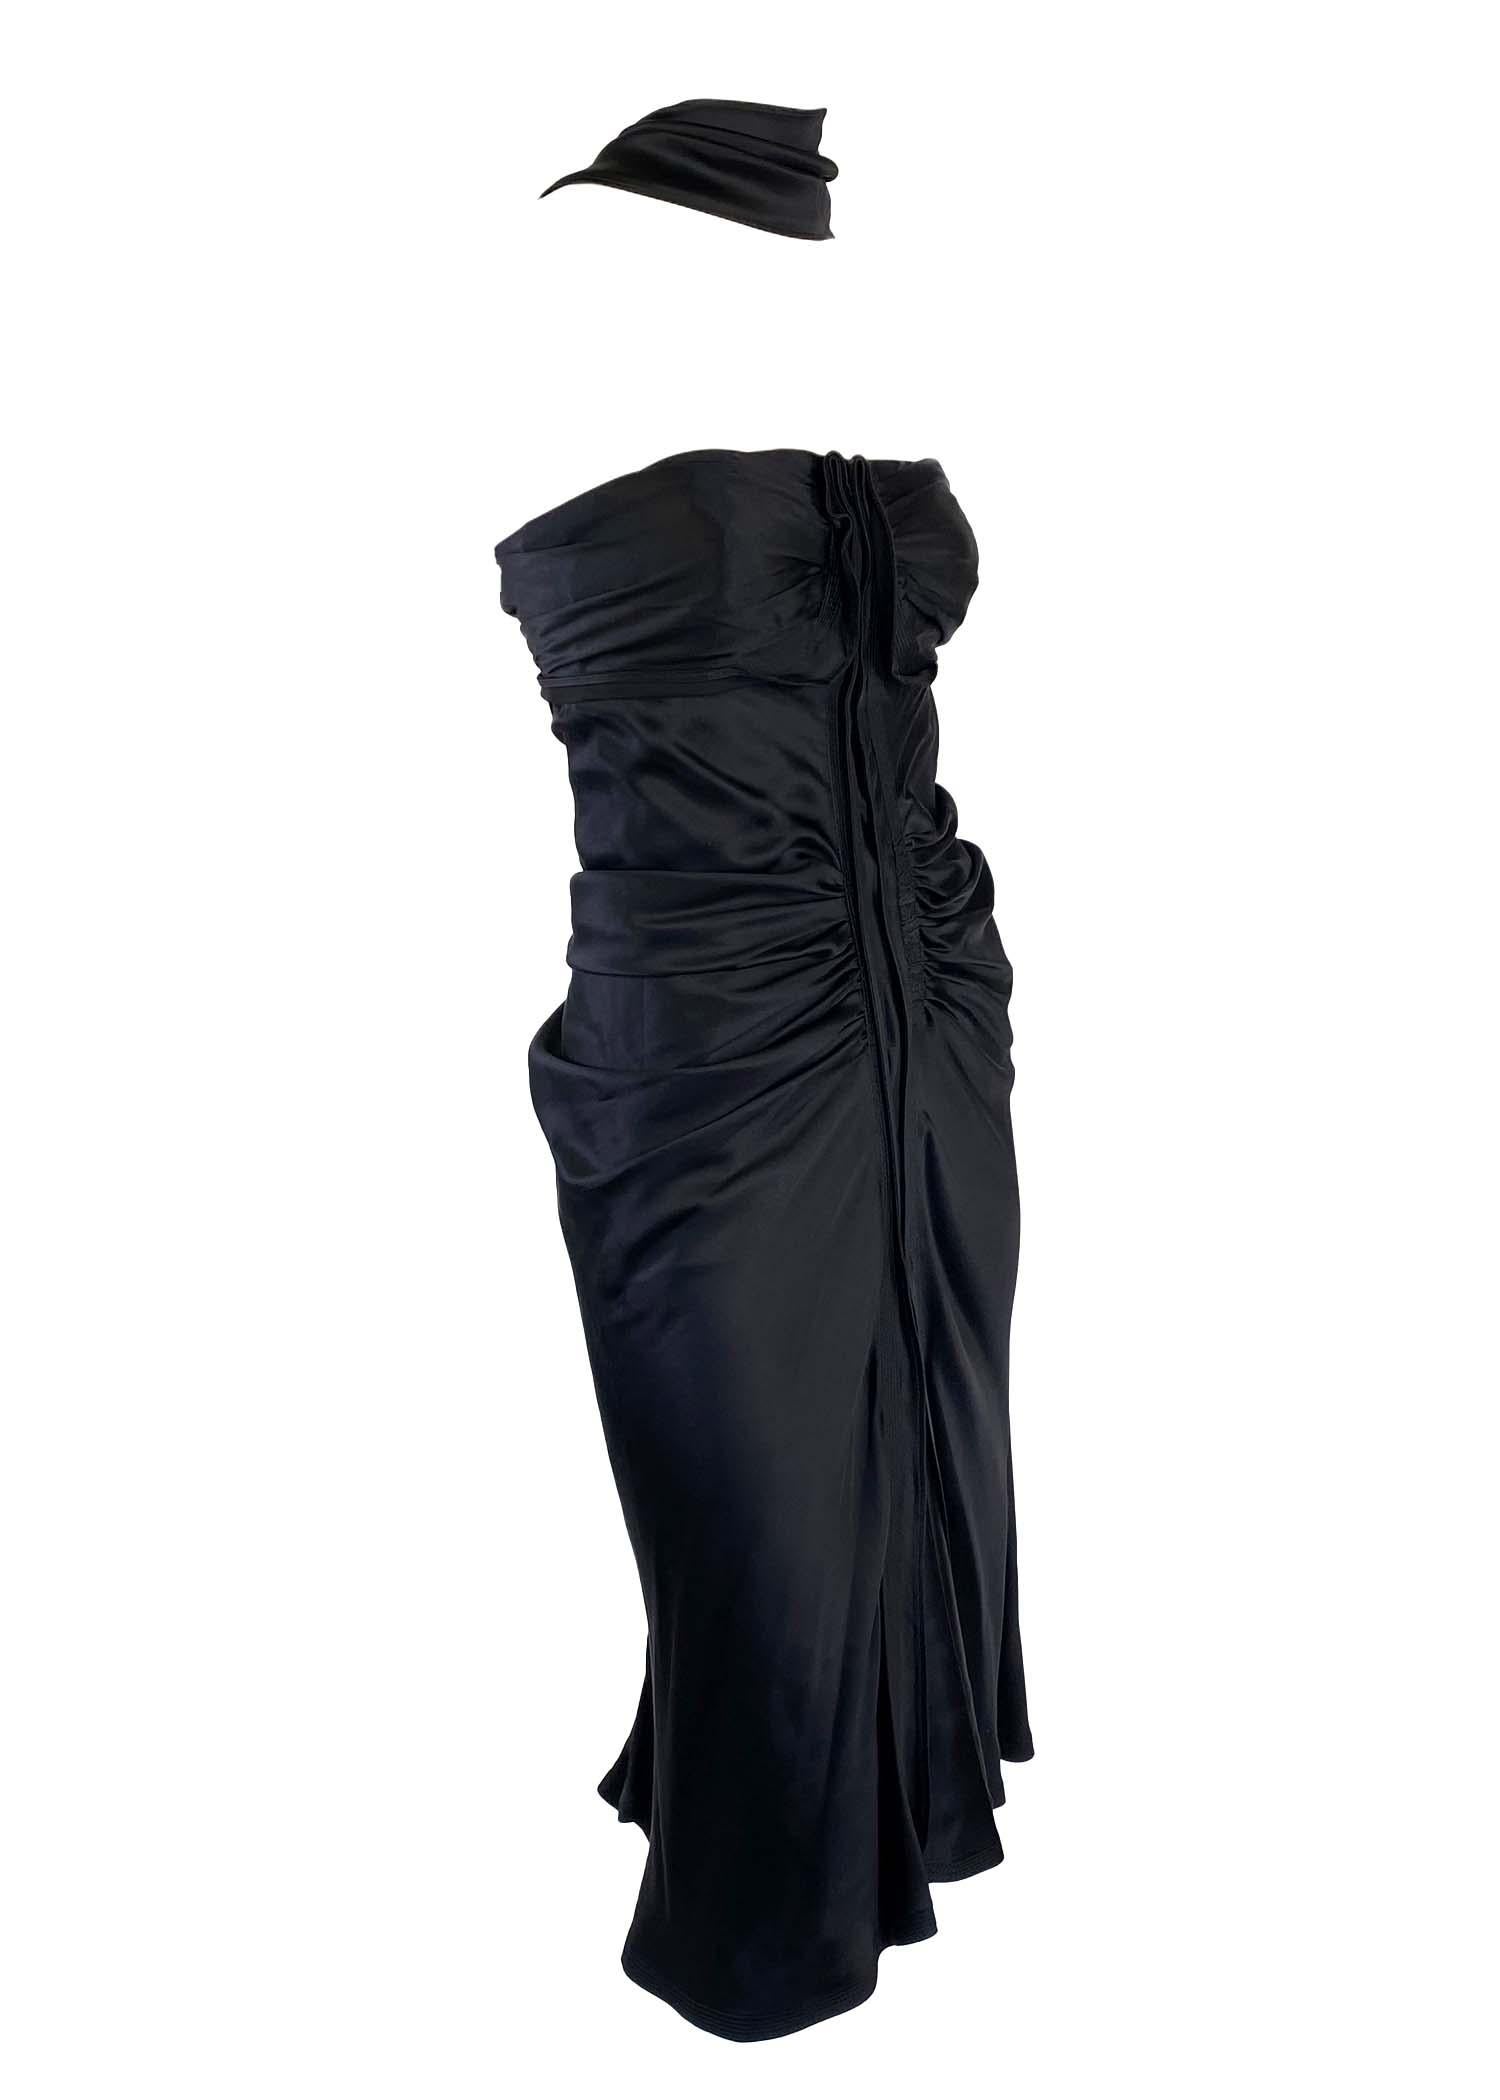 F/W 2003 Yves Saint Laurent by Tom Ford Black Silk Ruched Ruffle Cocktail Dress For Sale 5